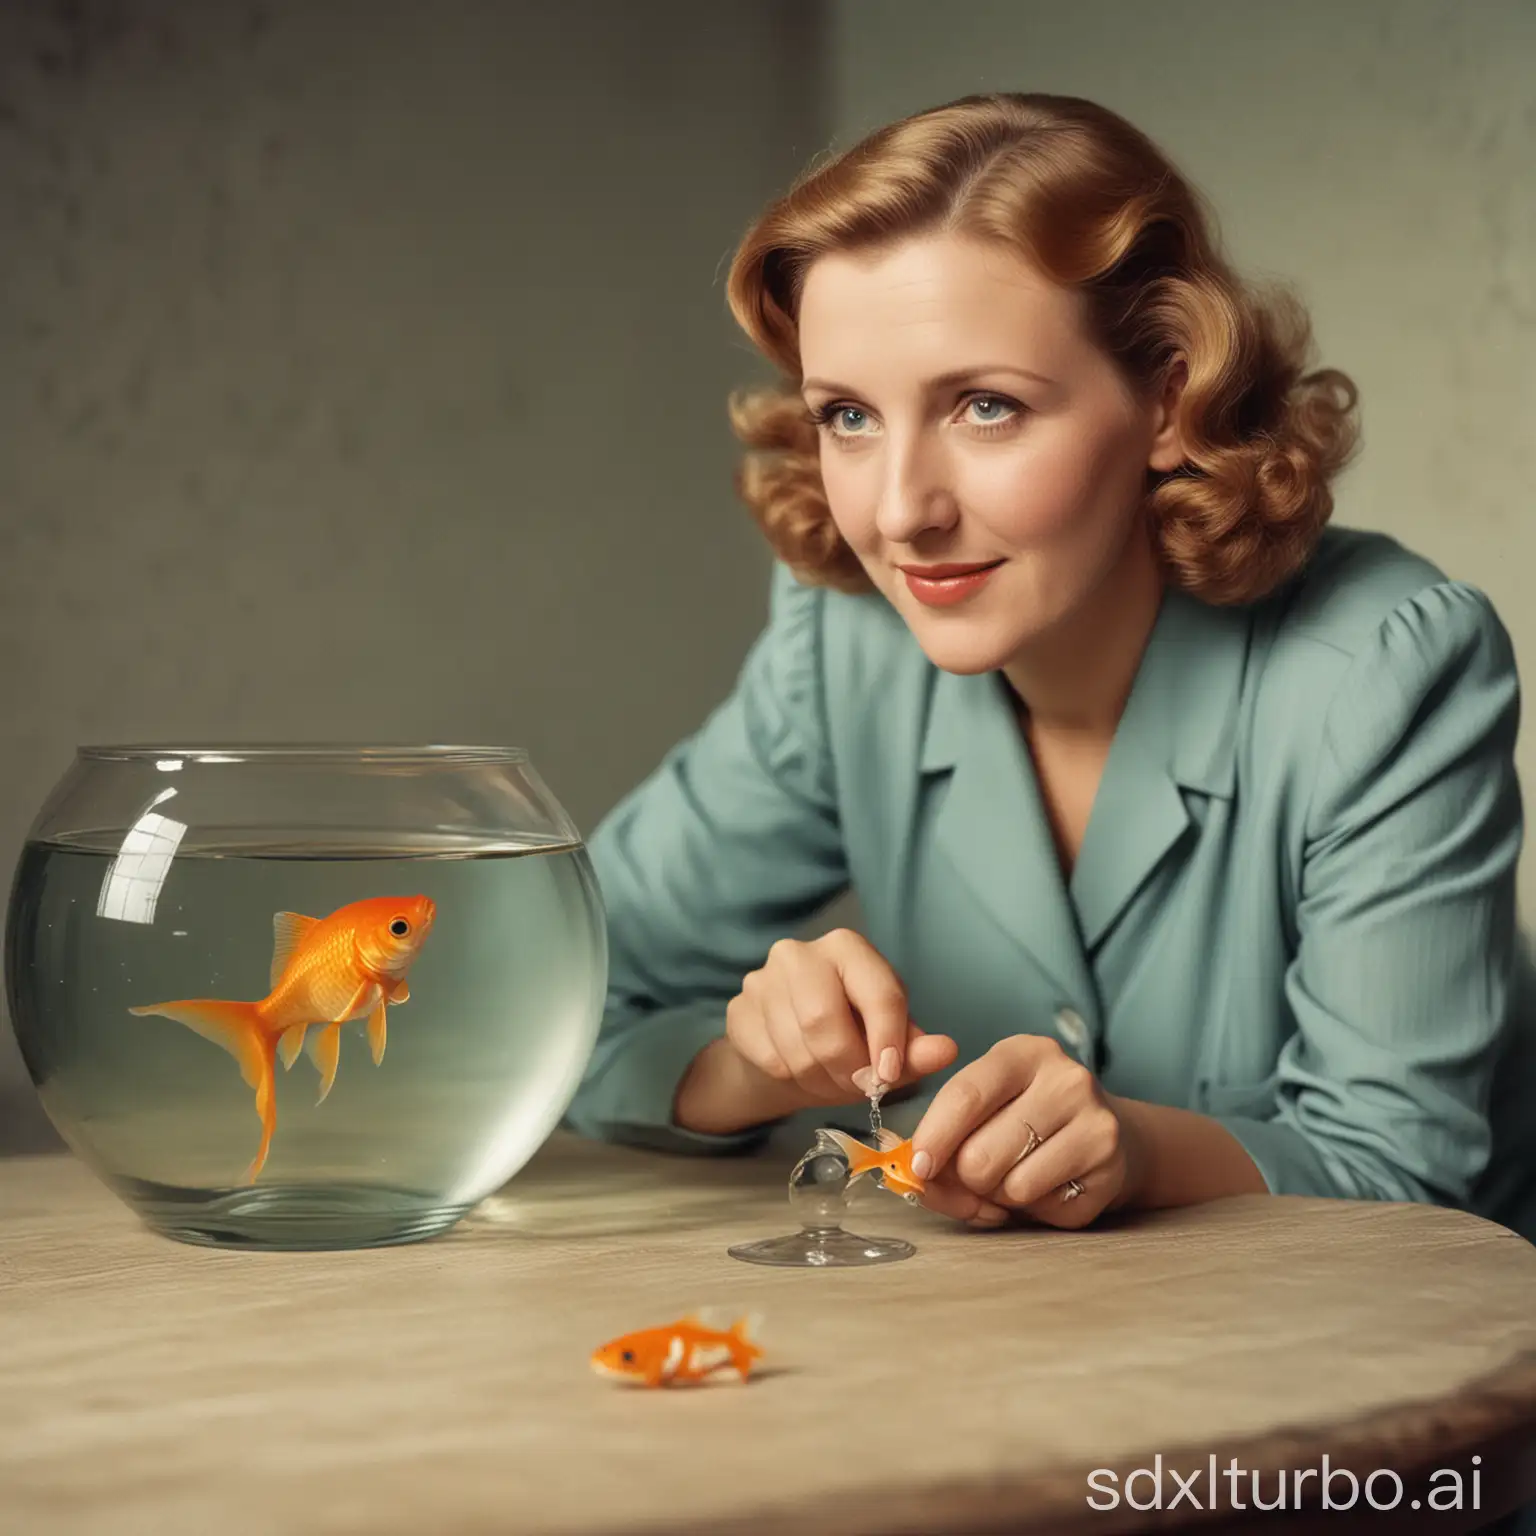 Vintage-Photograph-of-Eva-Braun-with-a-Goldfish-in-a-Bowl